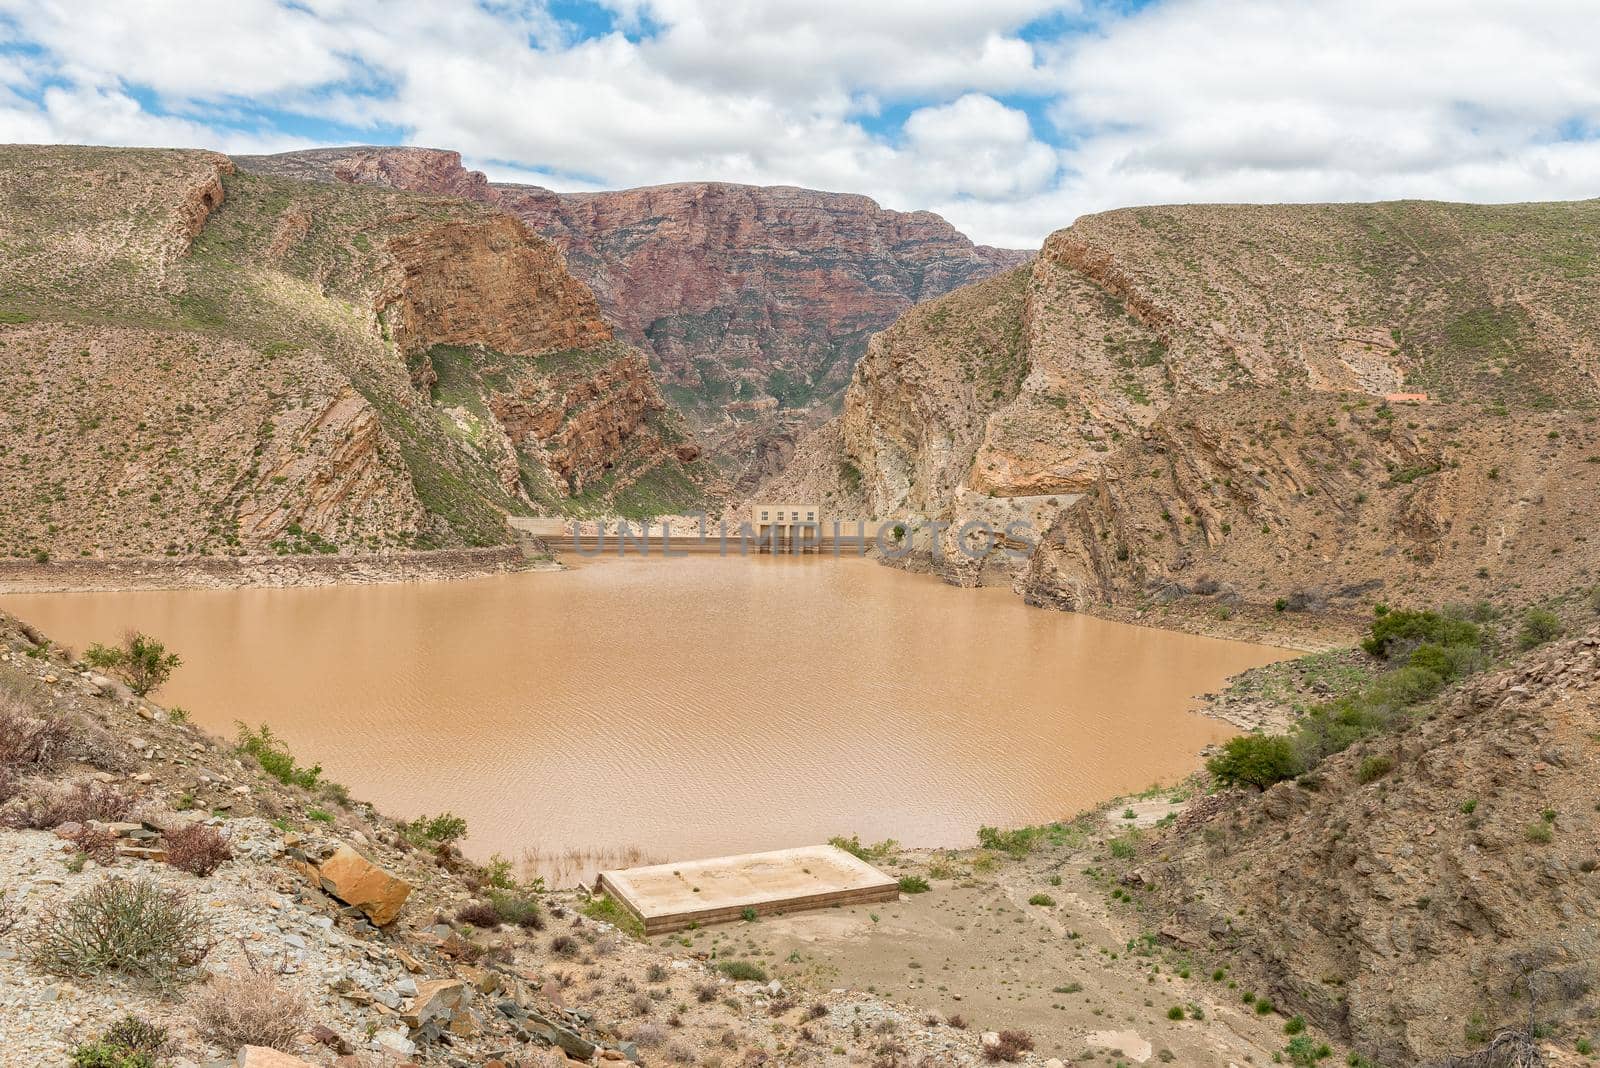 View of the Gamkapoort Dam in the Swartberg mountains. The dam wall is visible